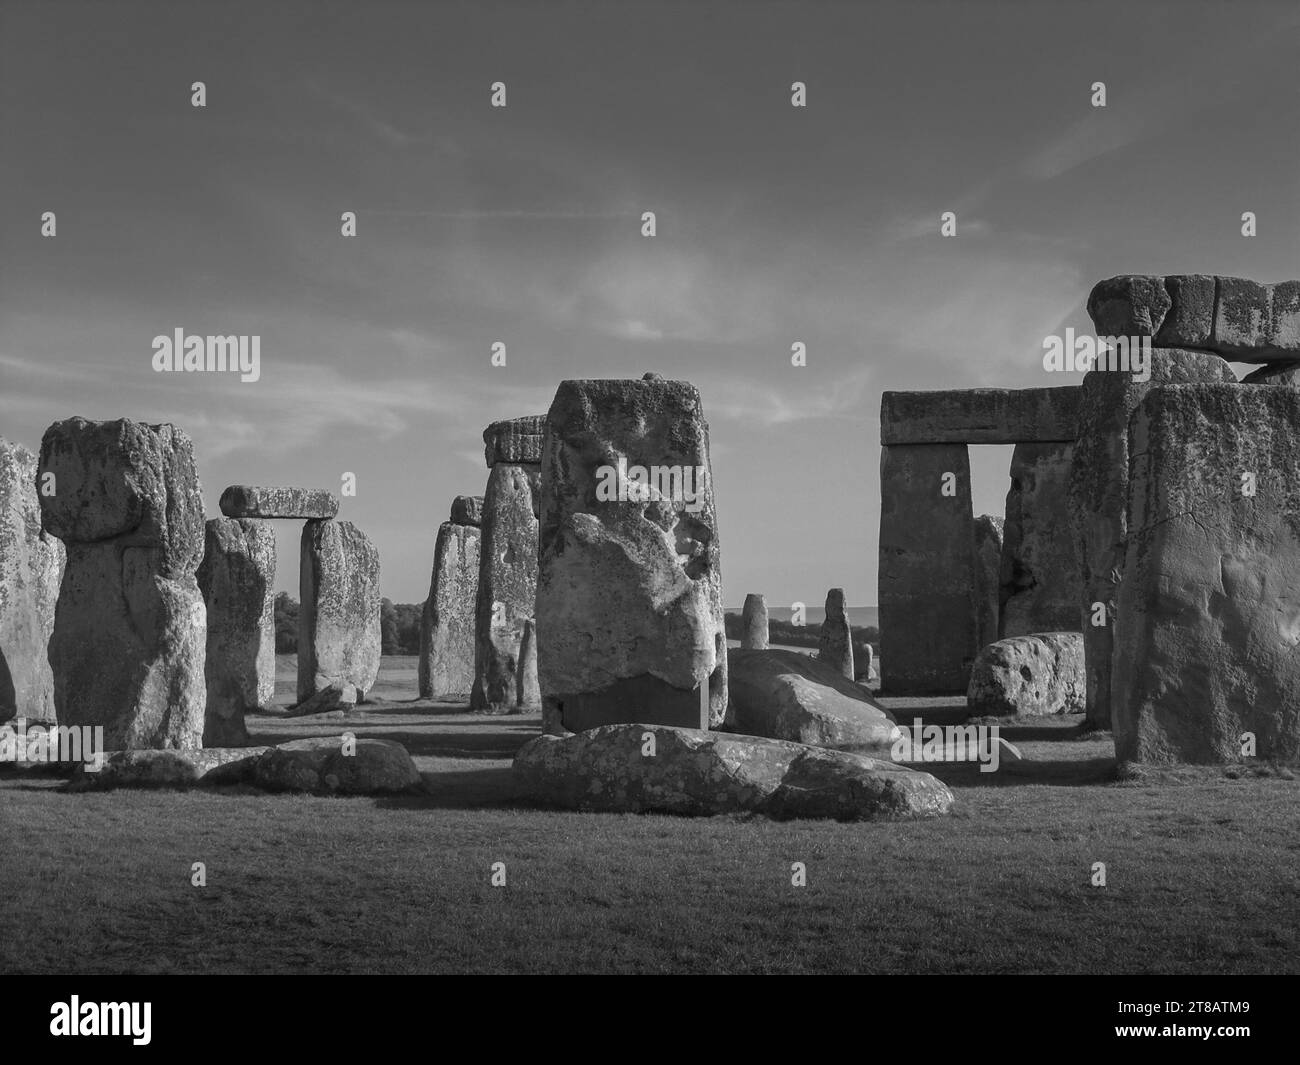 Stonehenge, Neolithic standing stones, stone circle monument.  Mythical connection with Merlin. Wiltshire, England, United Kingdom.  Monochrome. Stock Photo